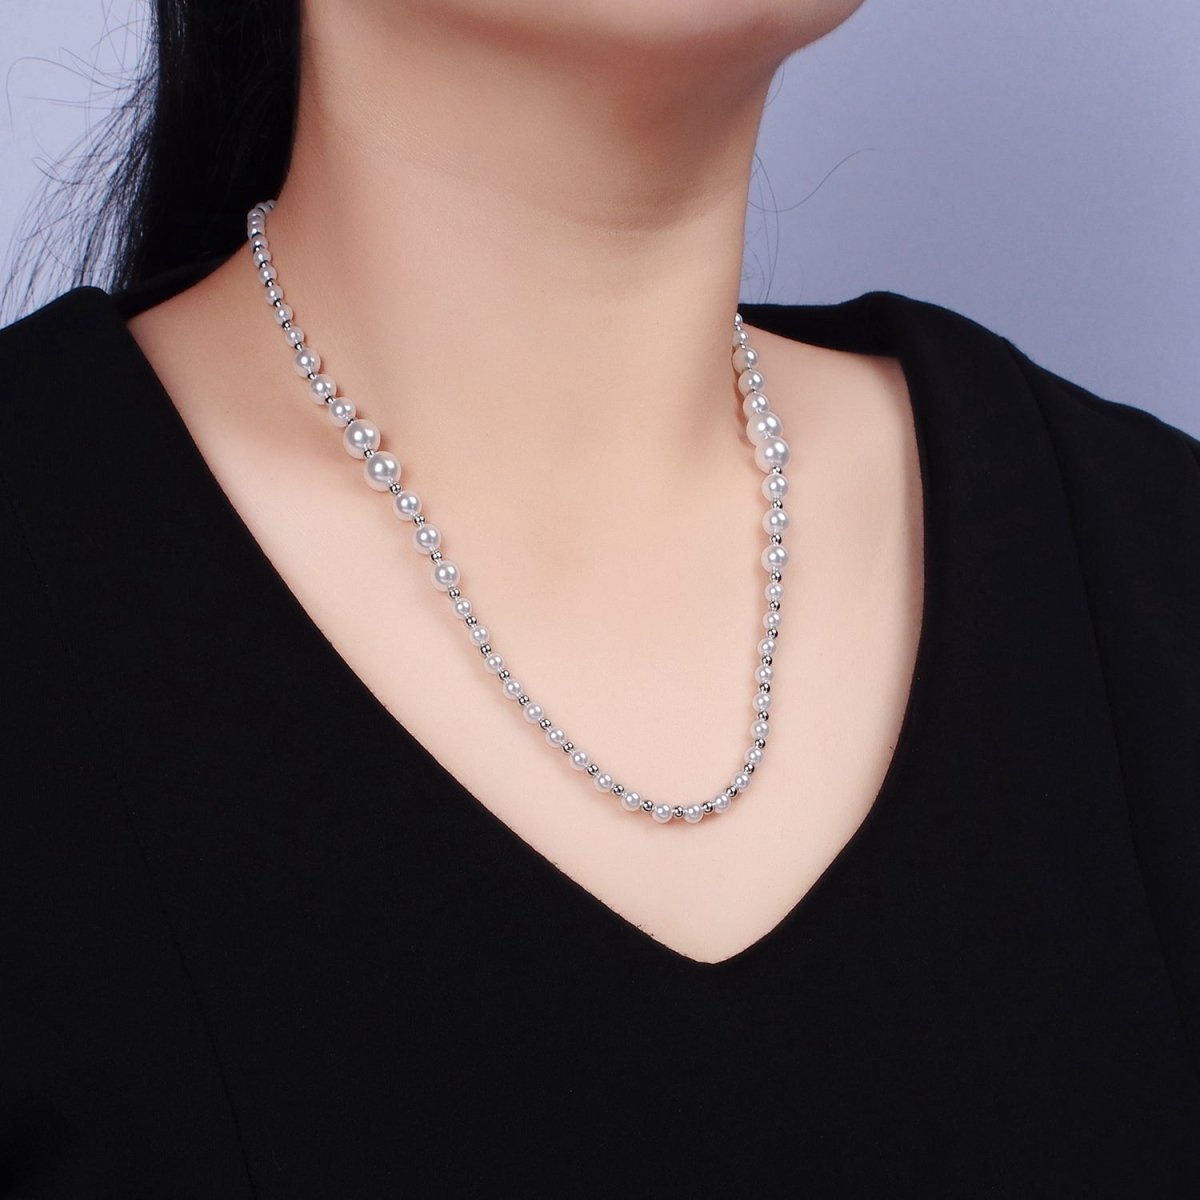 24K Gold Filled Irregular Round Shell Pearl Silver Bead 20 Inch Layering Mixed Metal Necklace | WA-2329 Clearance Pricing - DLUXCA